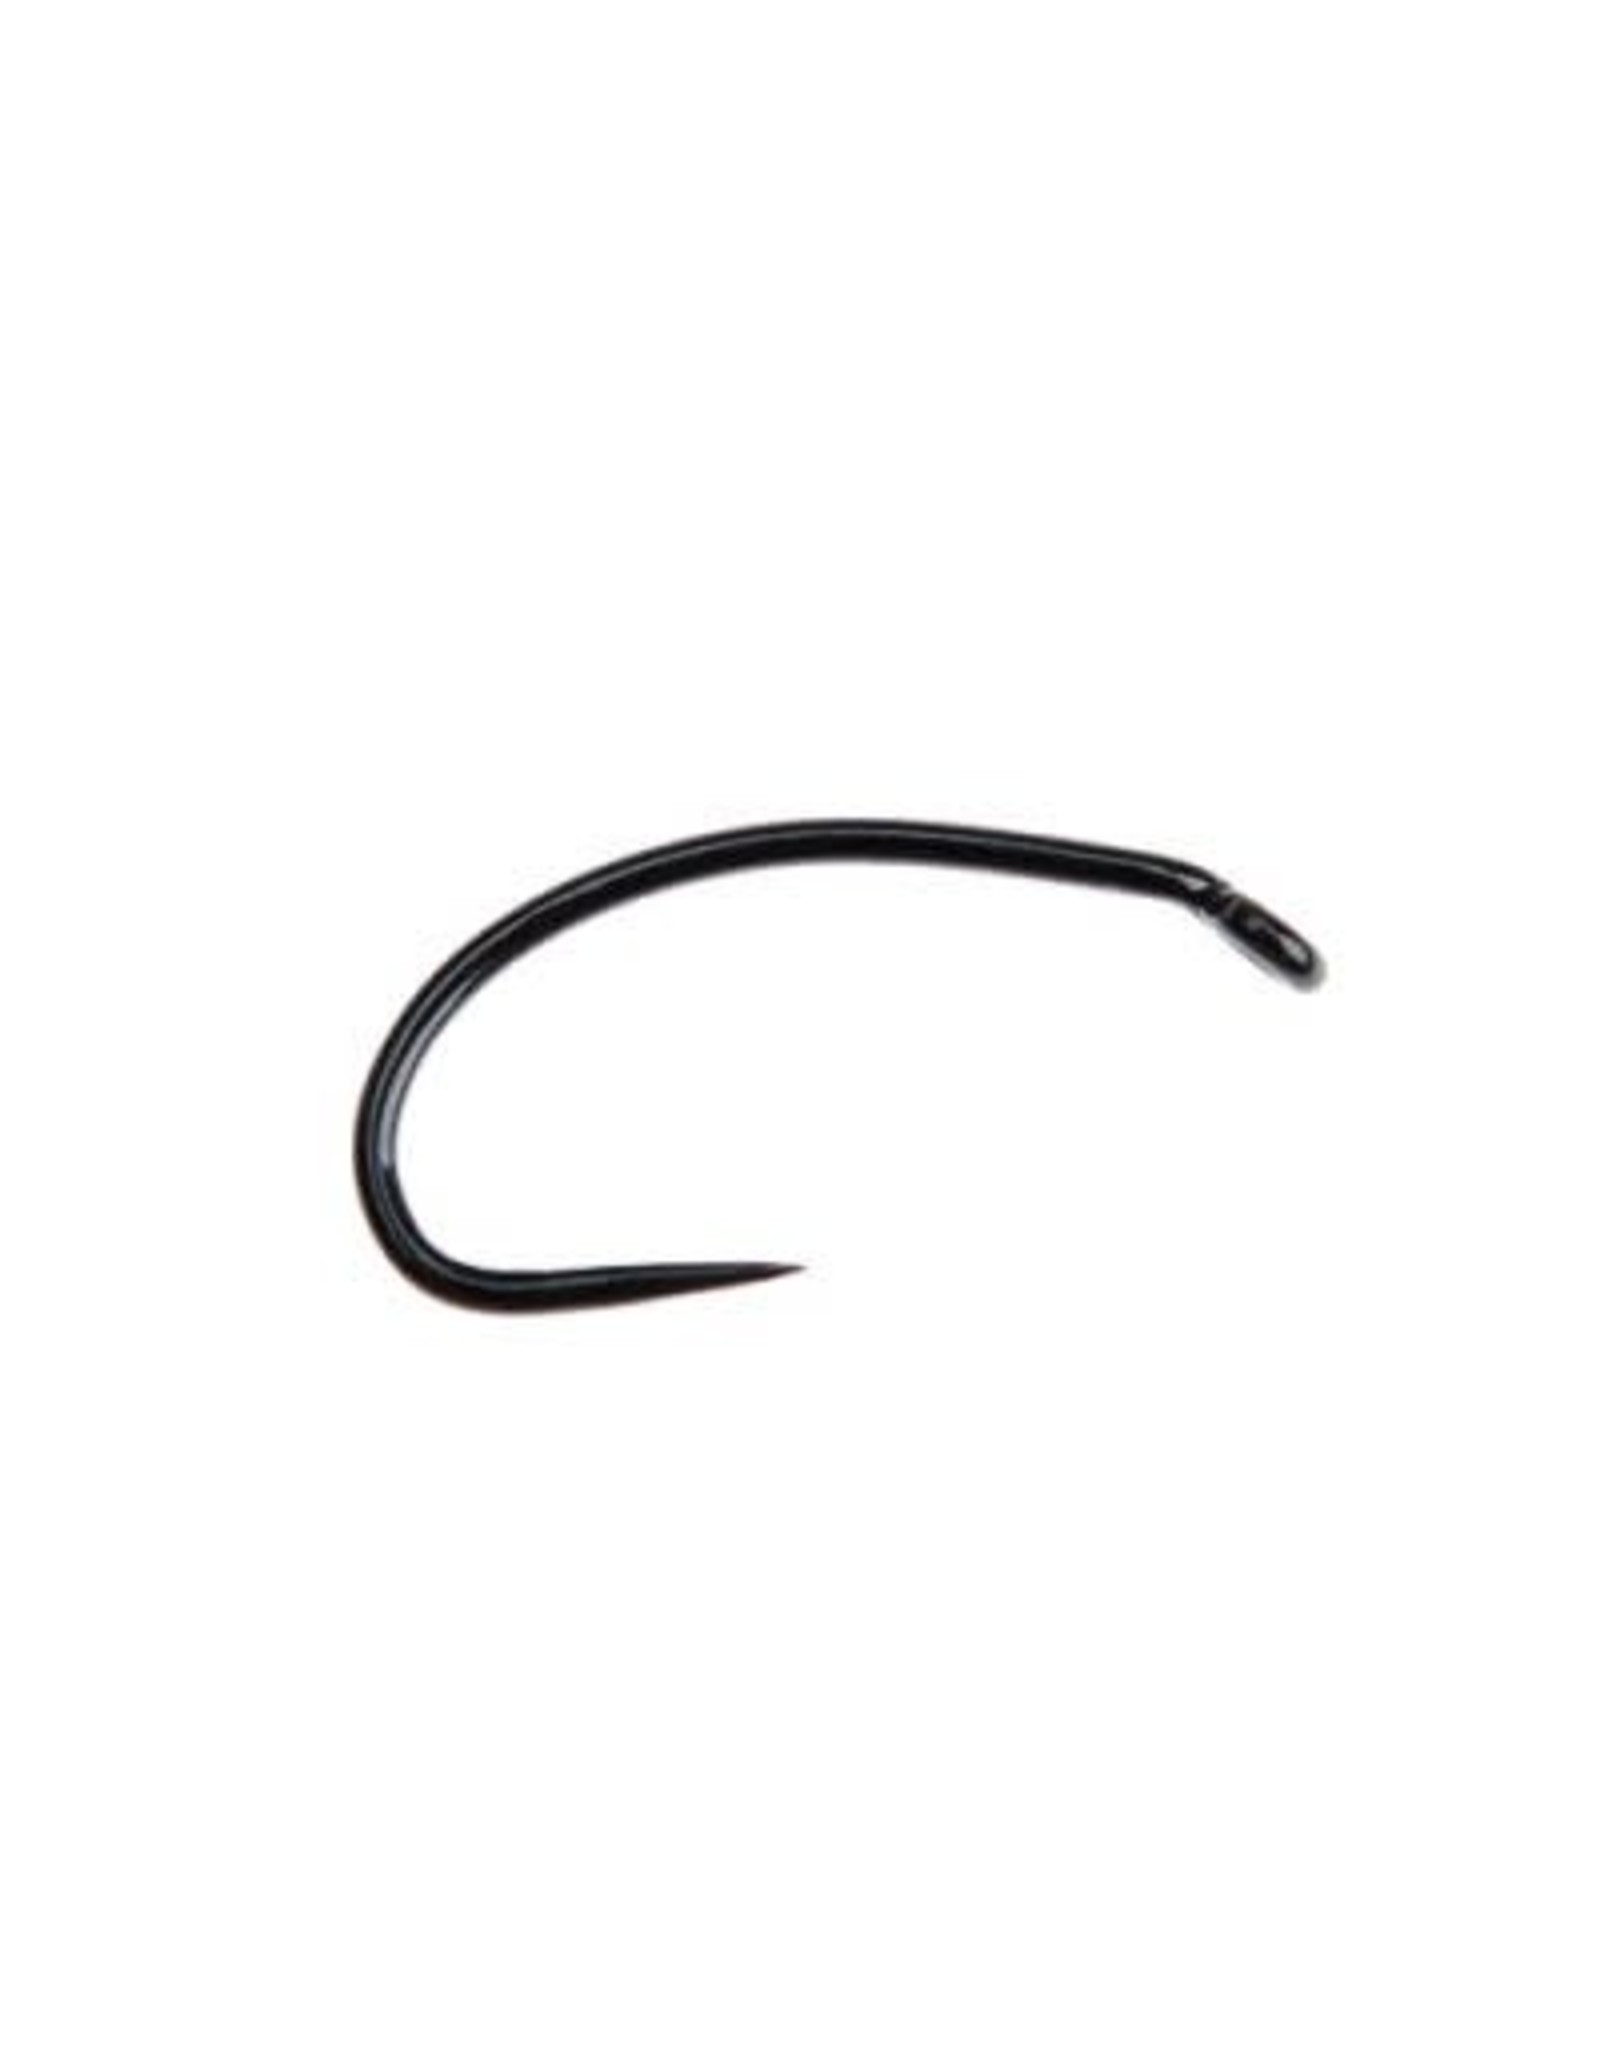 Ahrex Hooks AHREX FW541 #16 Curved Nymph Barbless